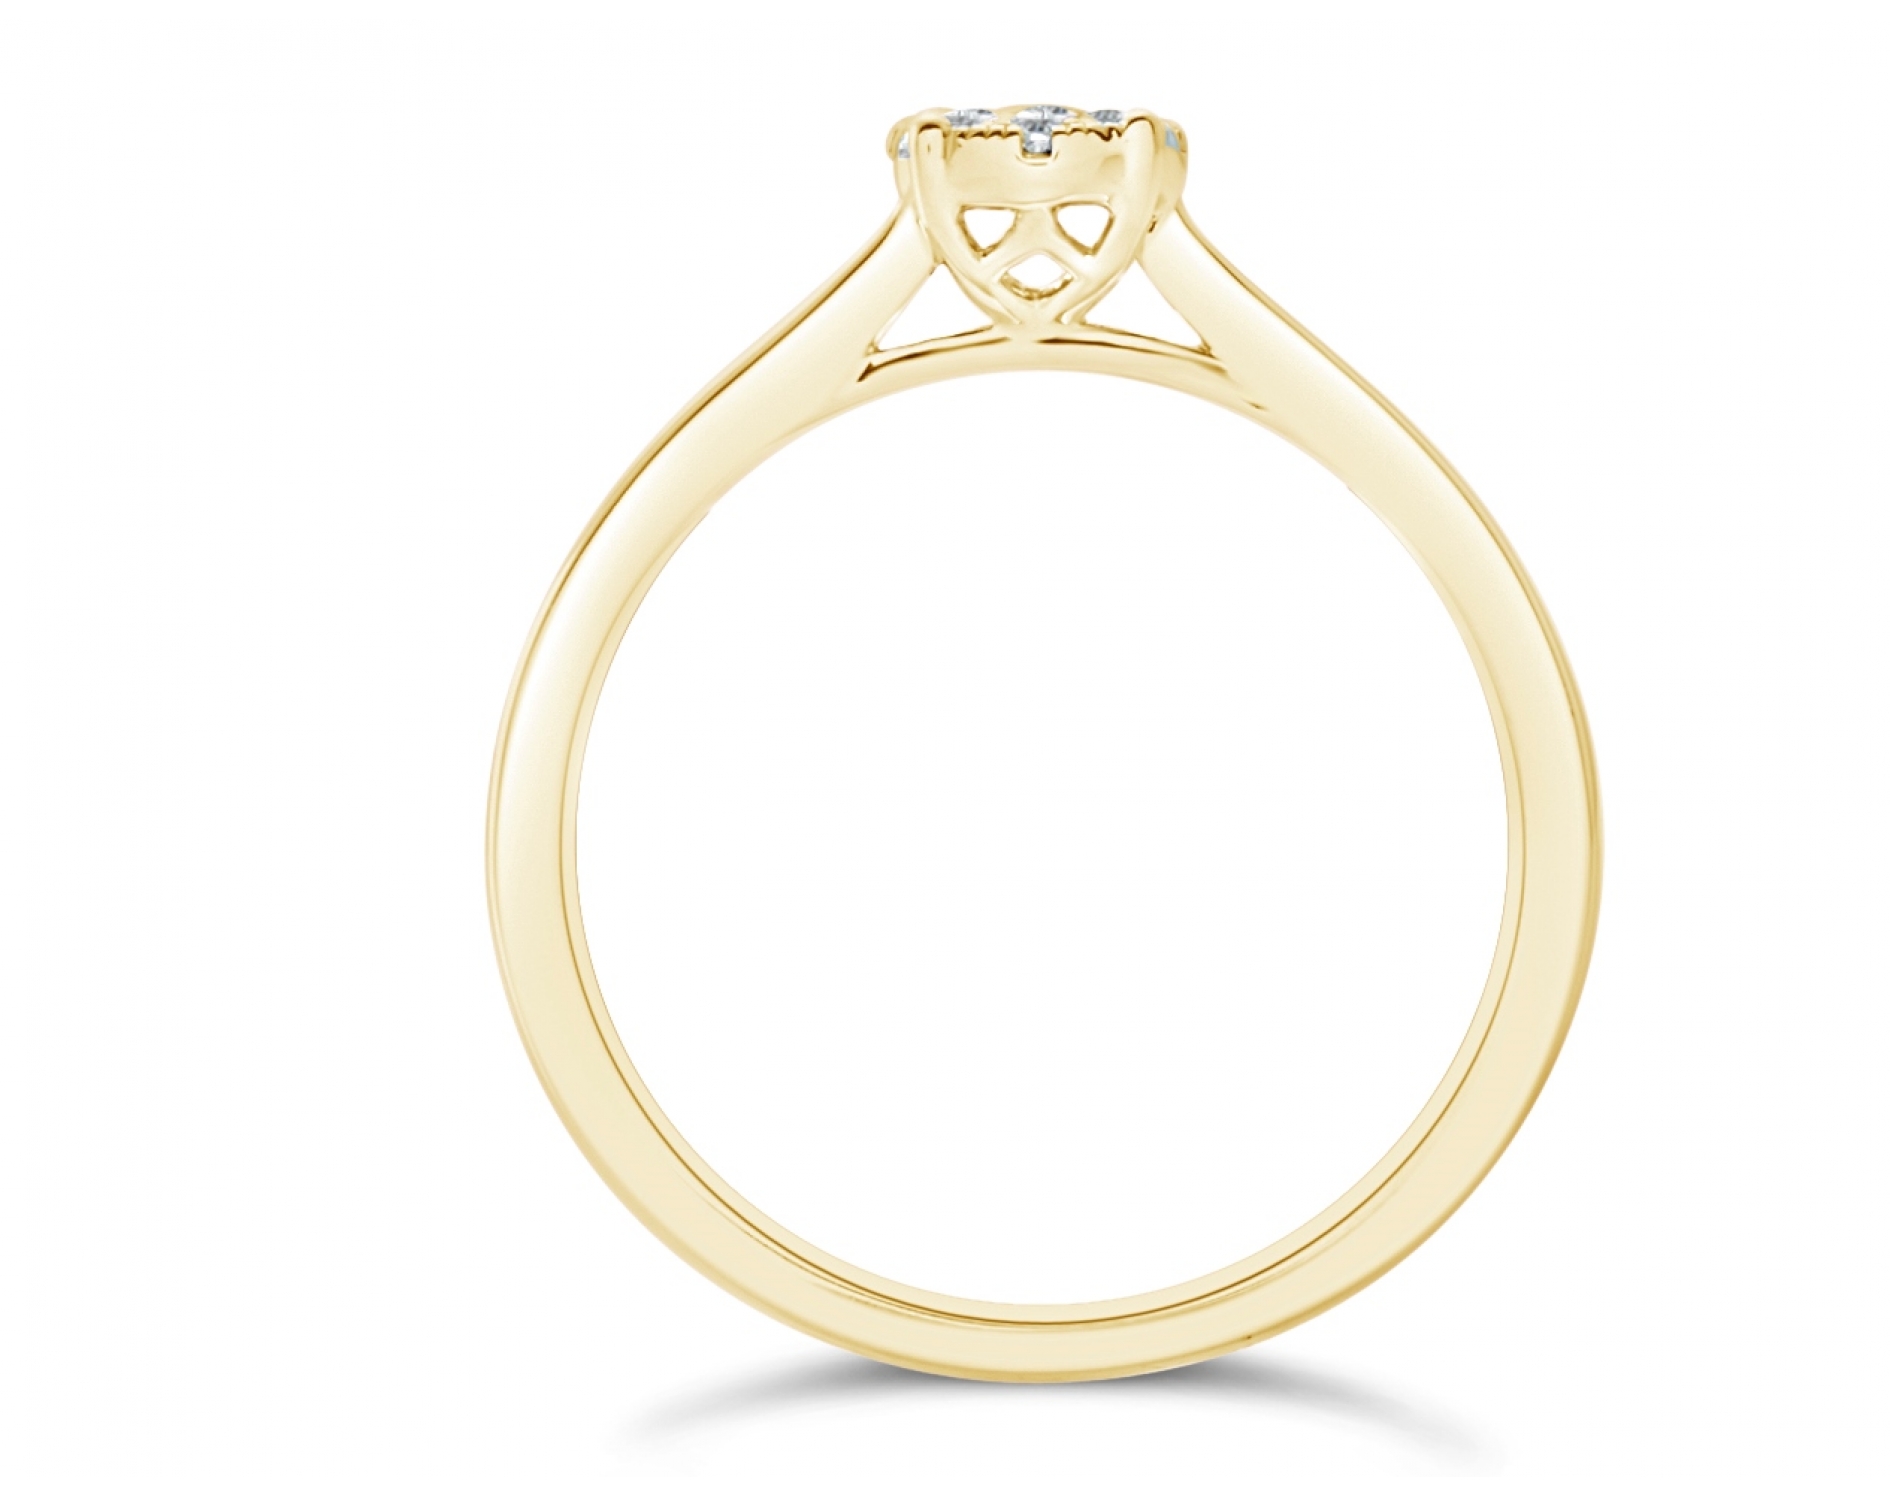 18k yellow gold cathedral illusion set engagement ring Photos & images